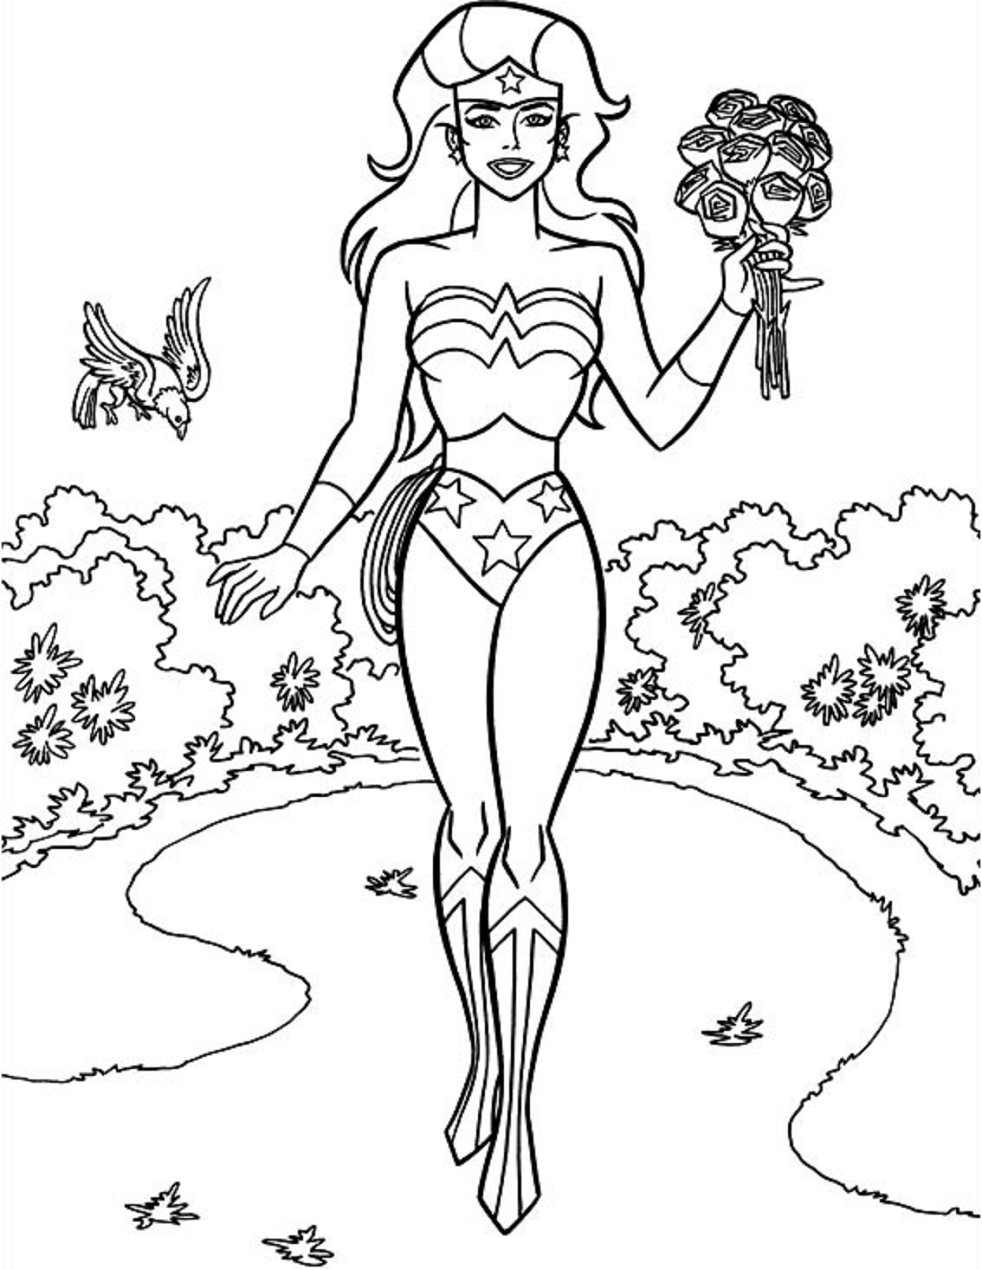 Wonder Woman With Flowers Coloring Page